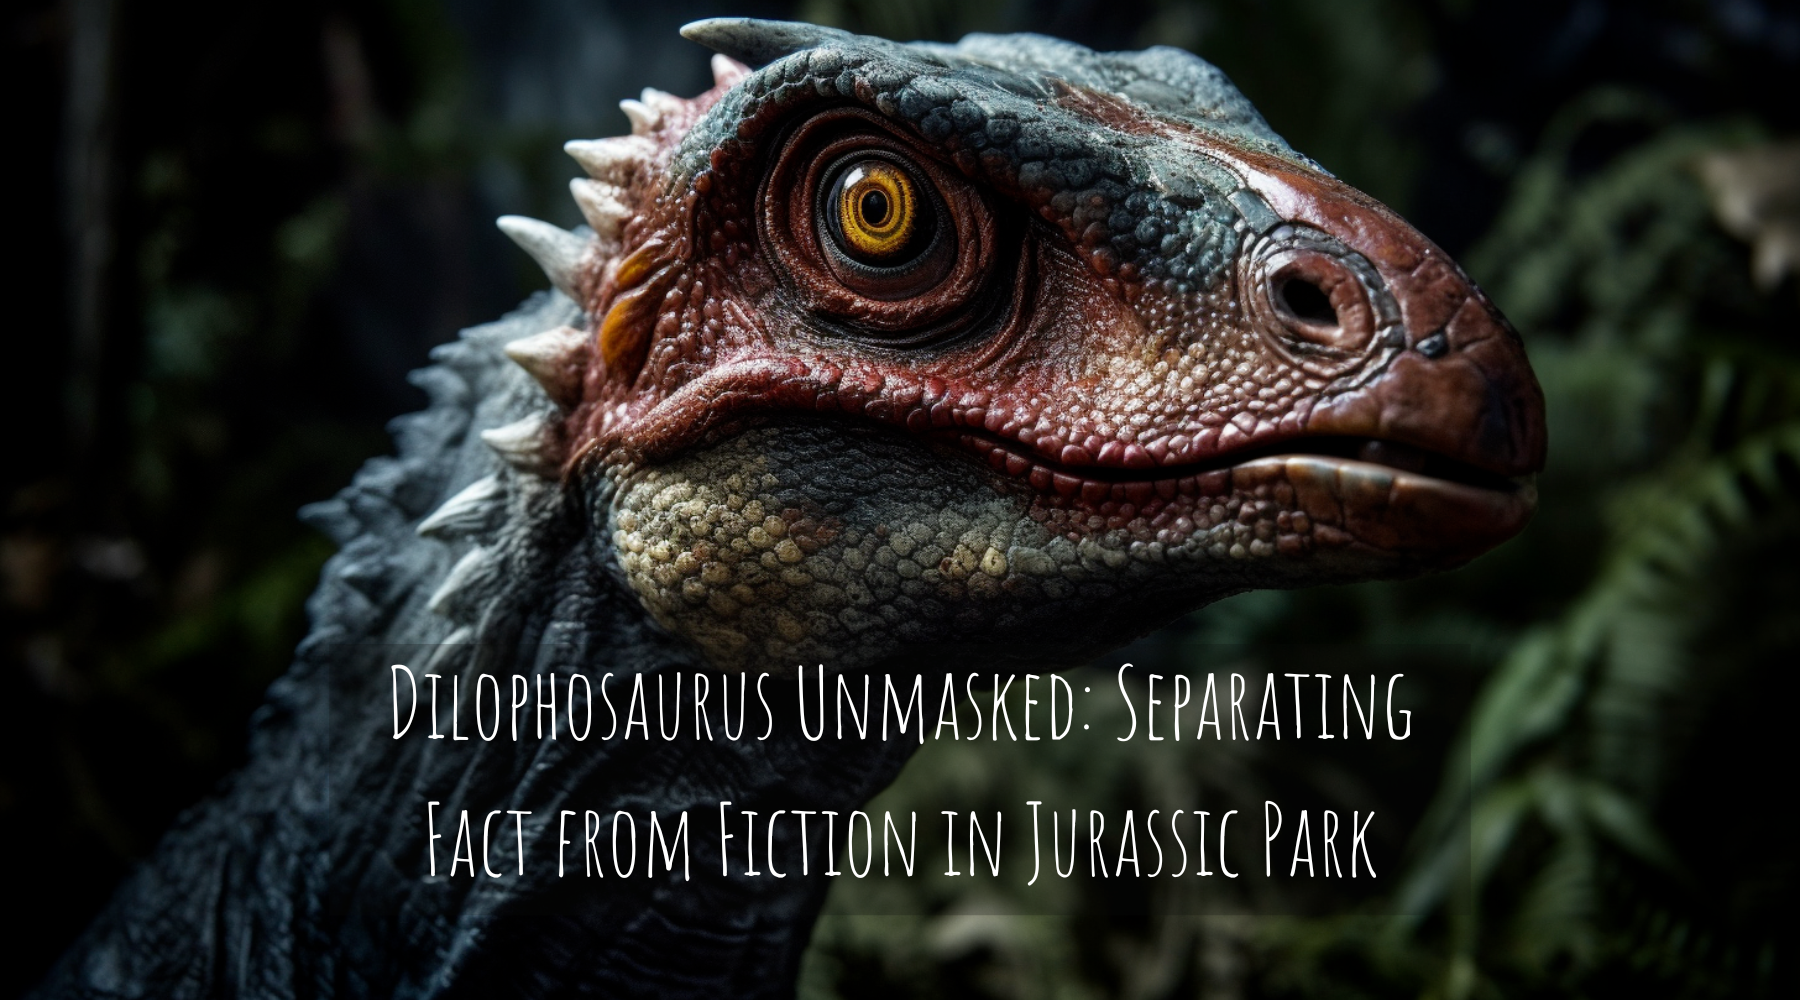 Dilophosaurus Unmasked: Separating Fact from Fiction in Jurassic Park